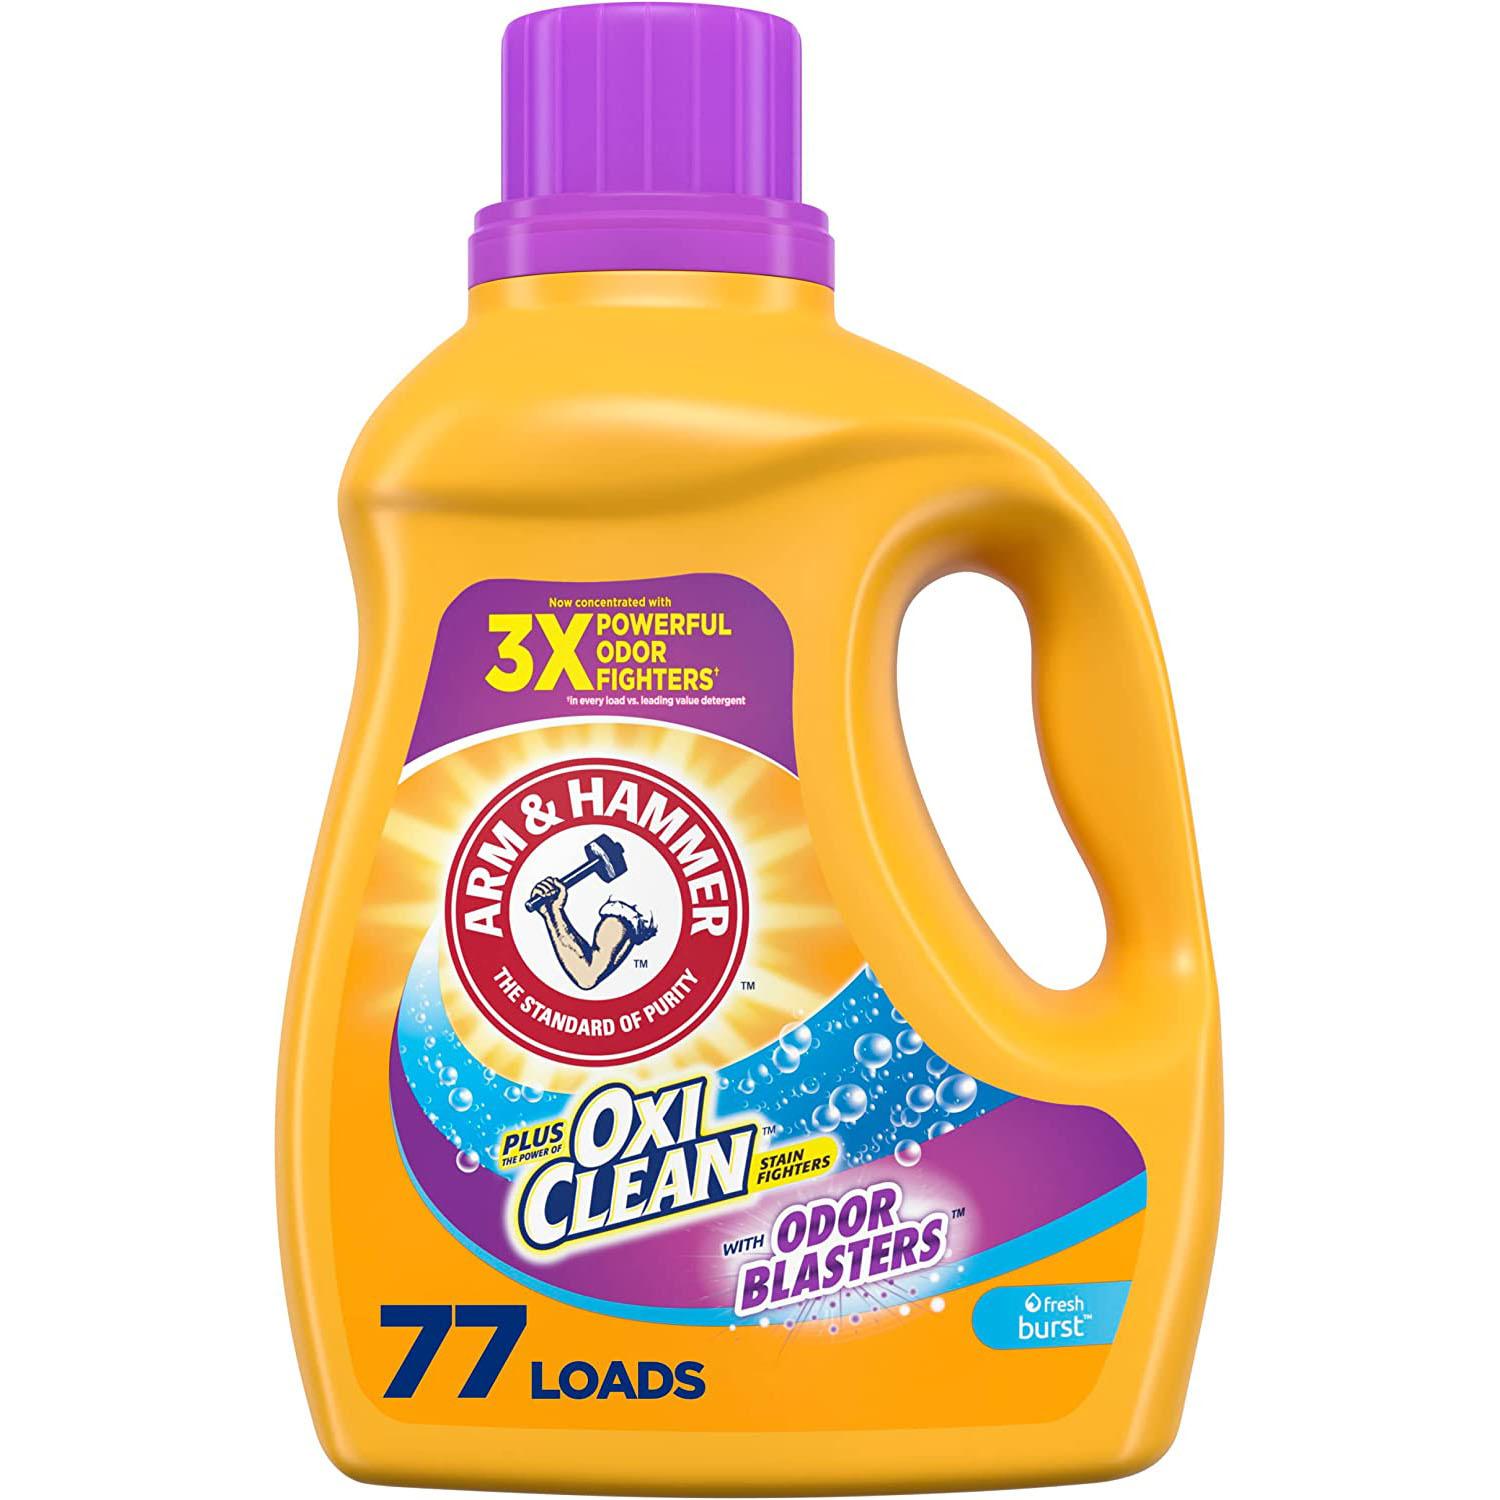 Arm and Hammer Liquid Laundry Detergent Fresh Burst for $6.64 Shipped